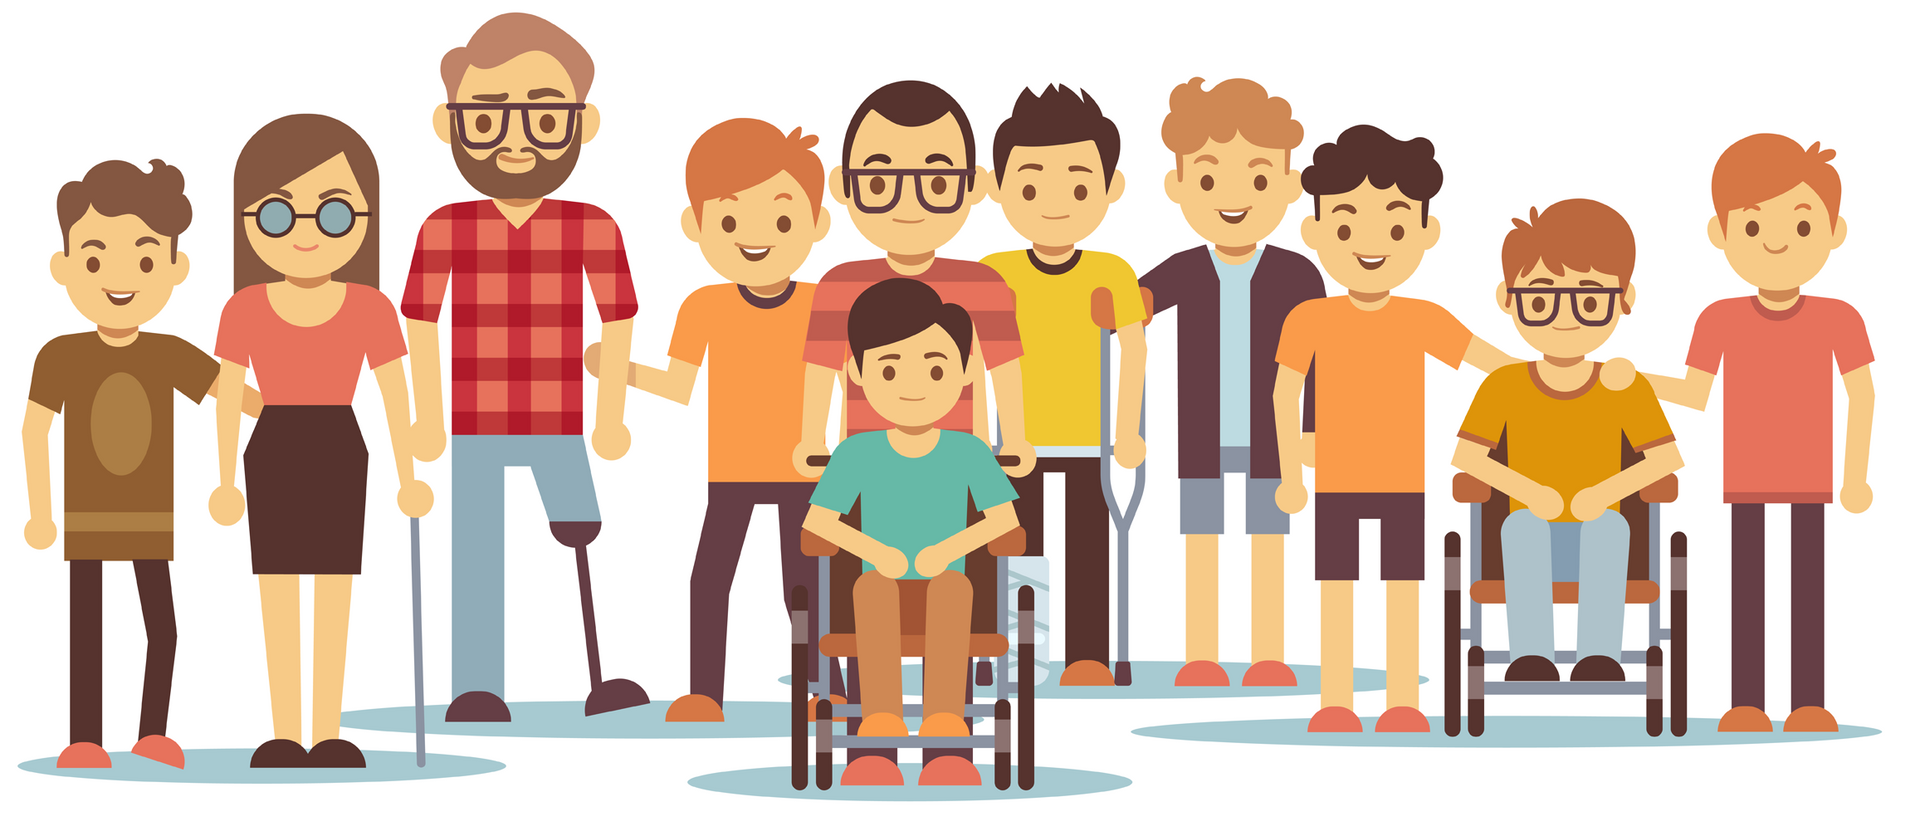 A cartoon drawing of a group of people. Al represent a type of disability - visible or invisible.